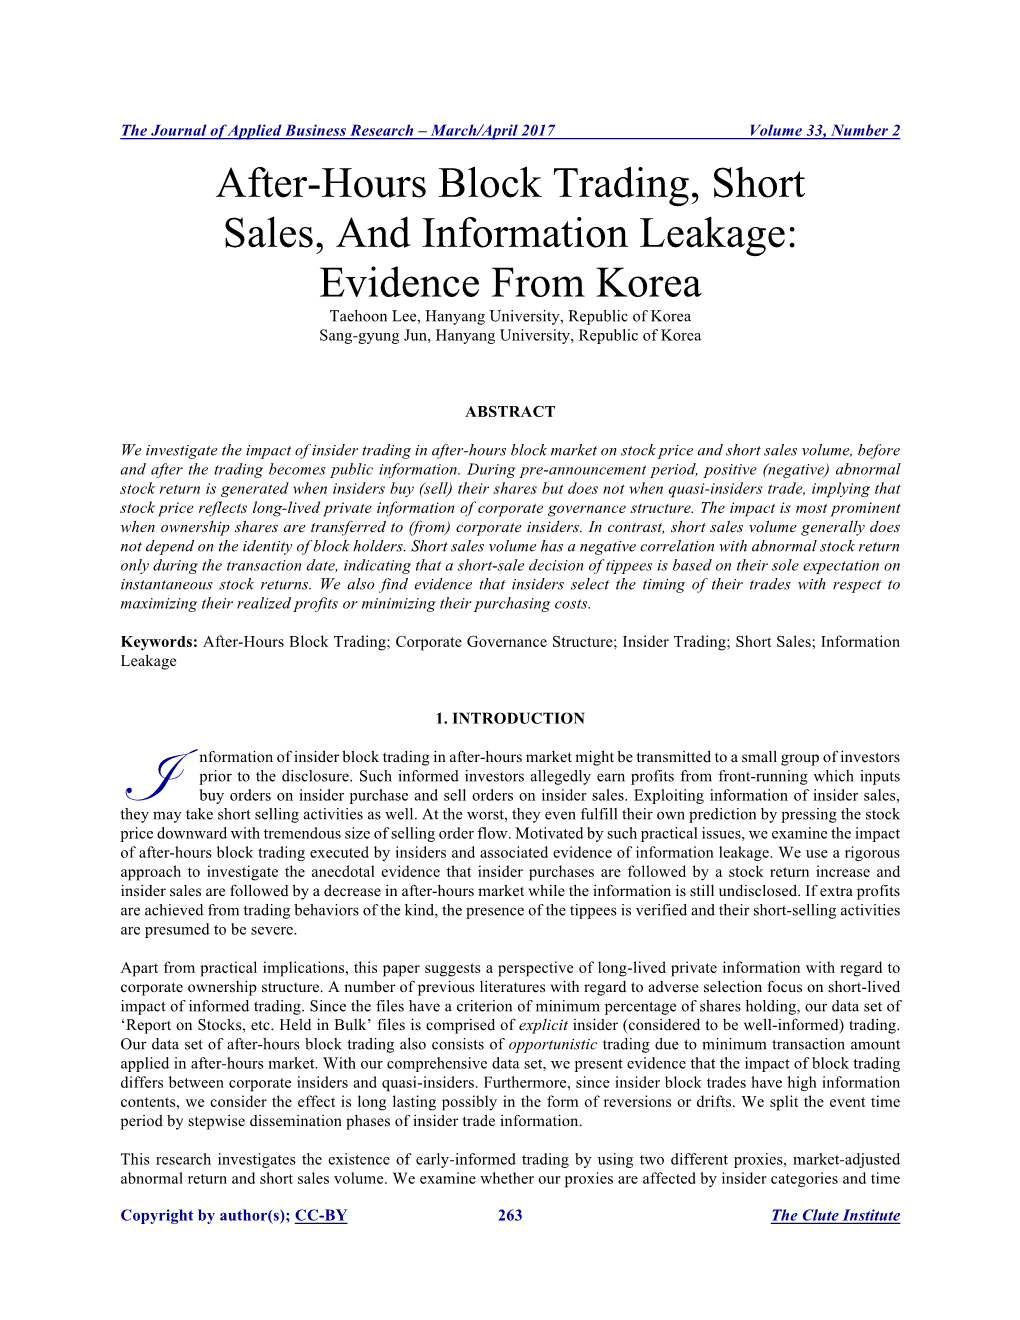 After-Hours Block Trading, Short Sales, and Information Leakage